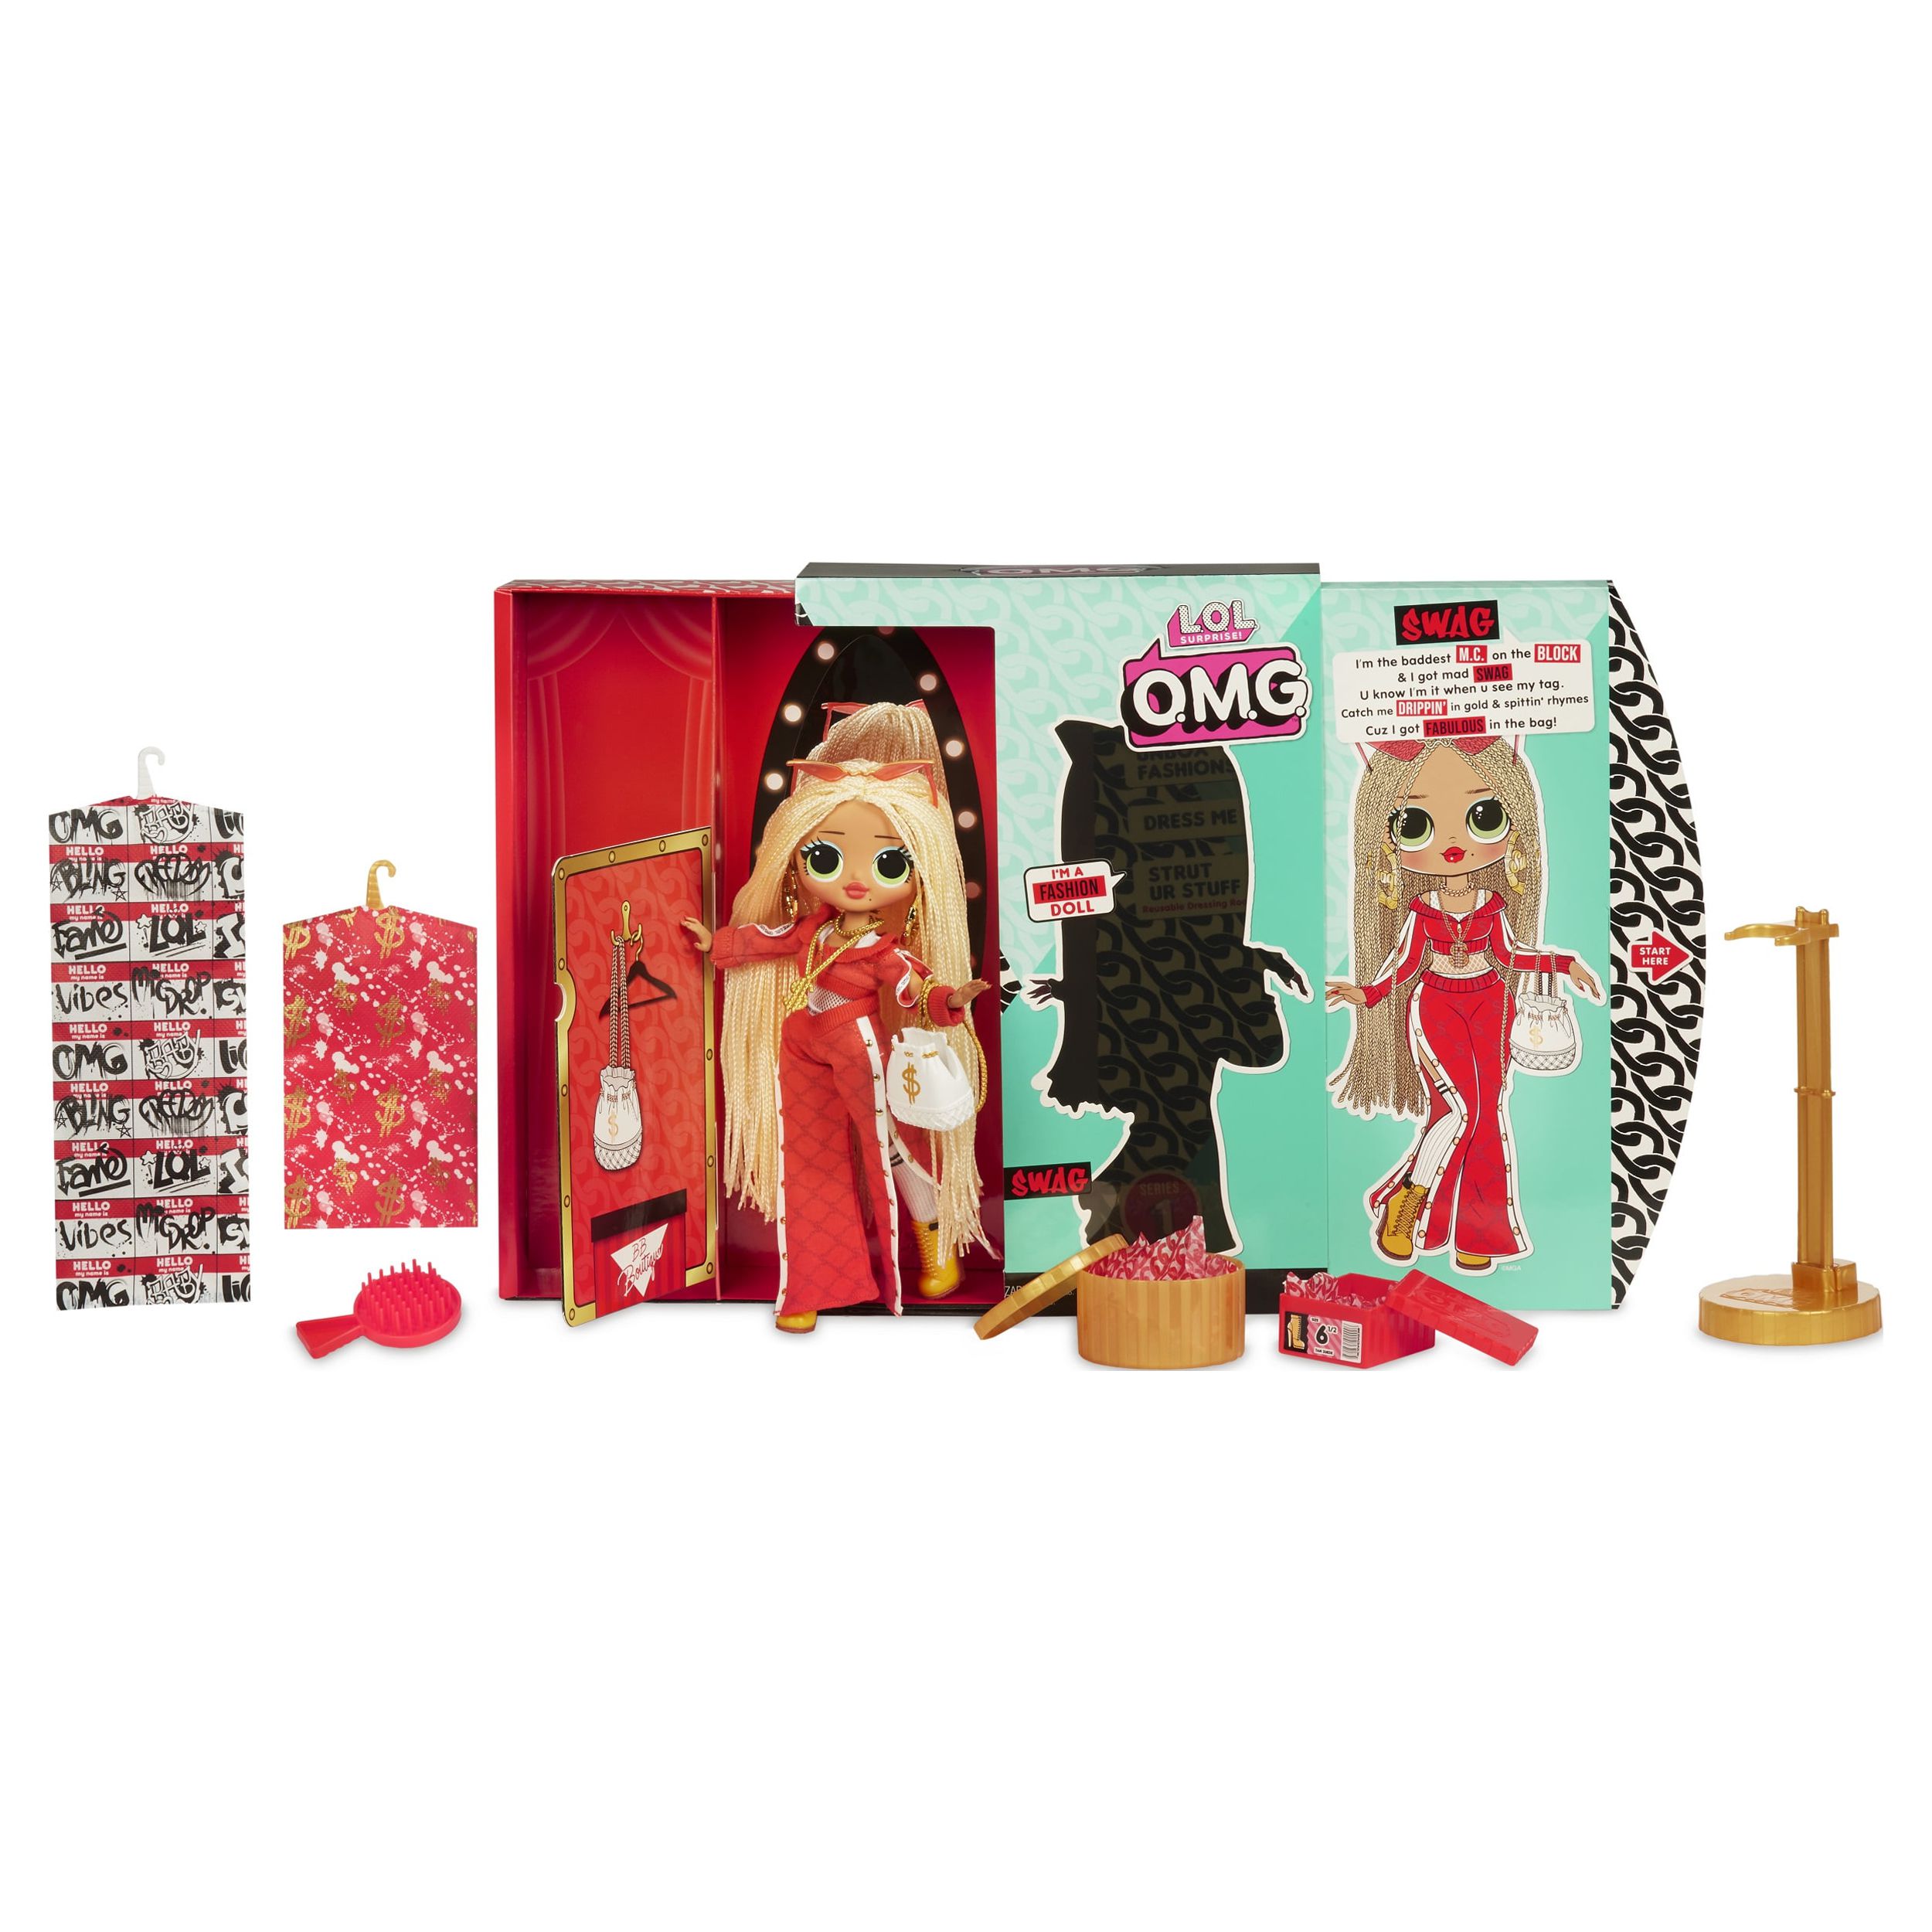 LOL Surprise OMG Swag Fashion Doll With 20 Surprises, Great Gift for Kids Ages 4 5 6+ - image 5 of 7